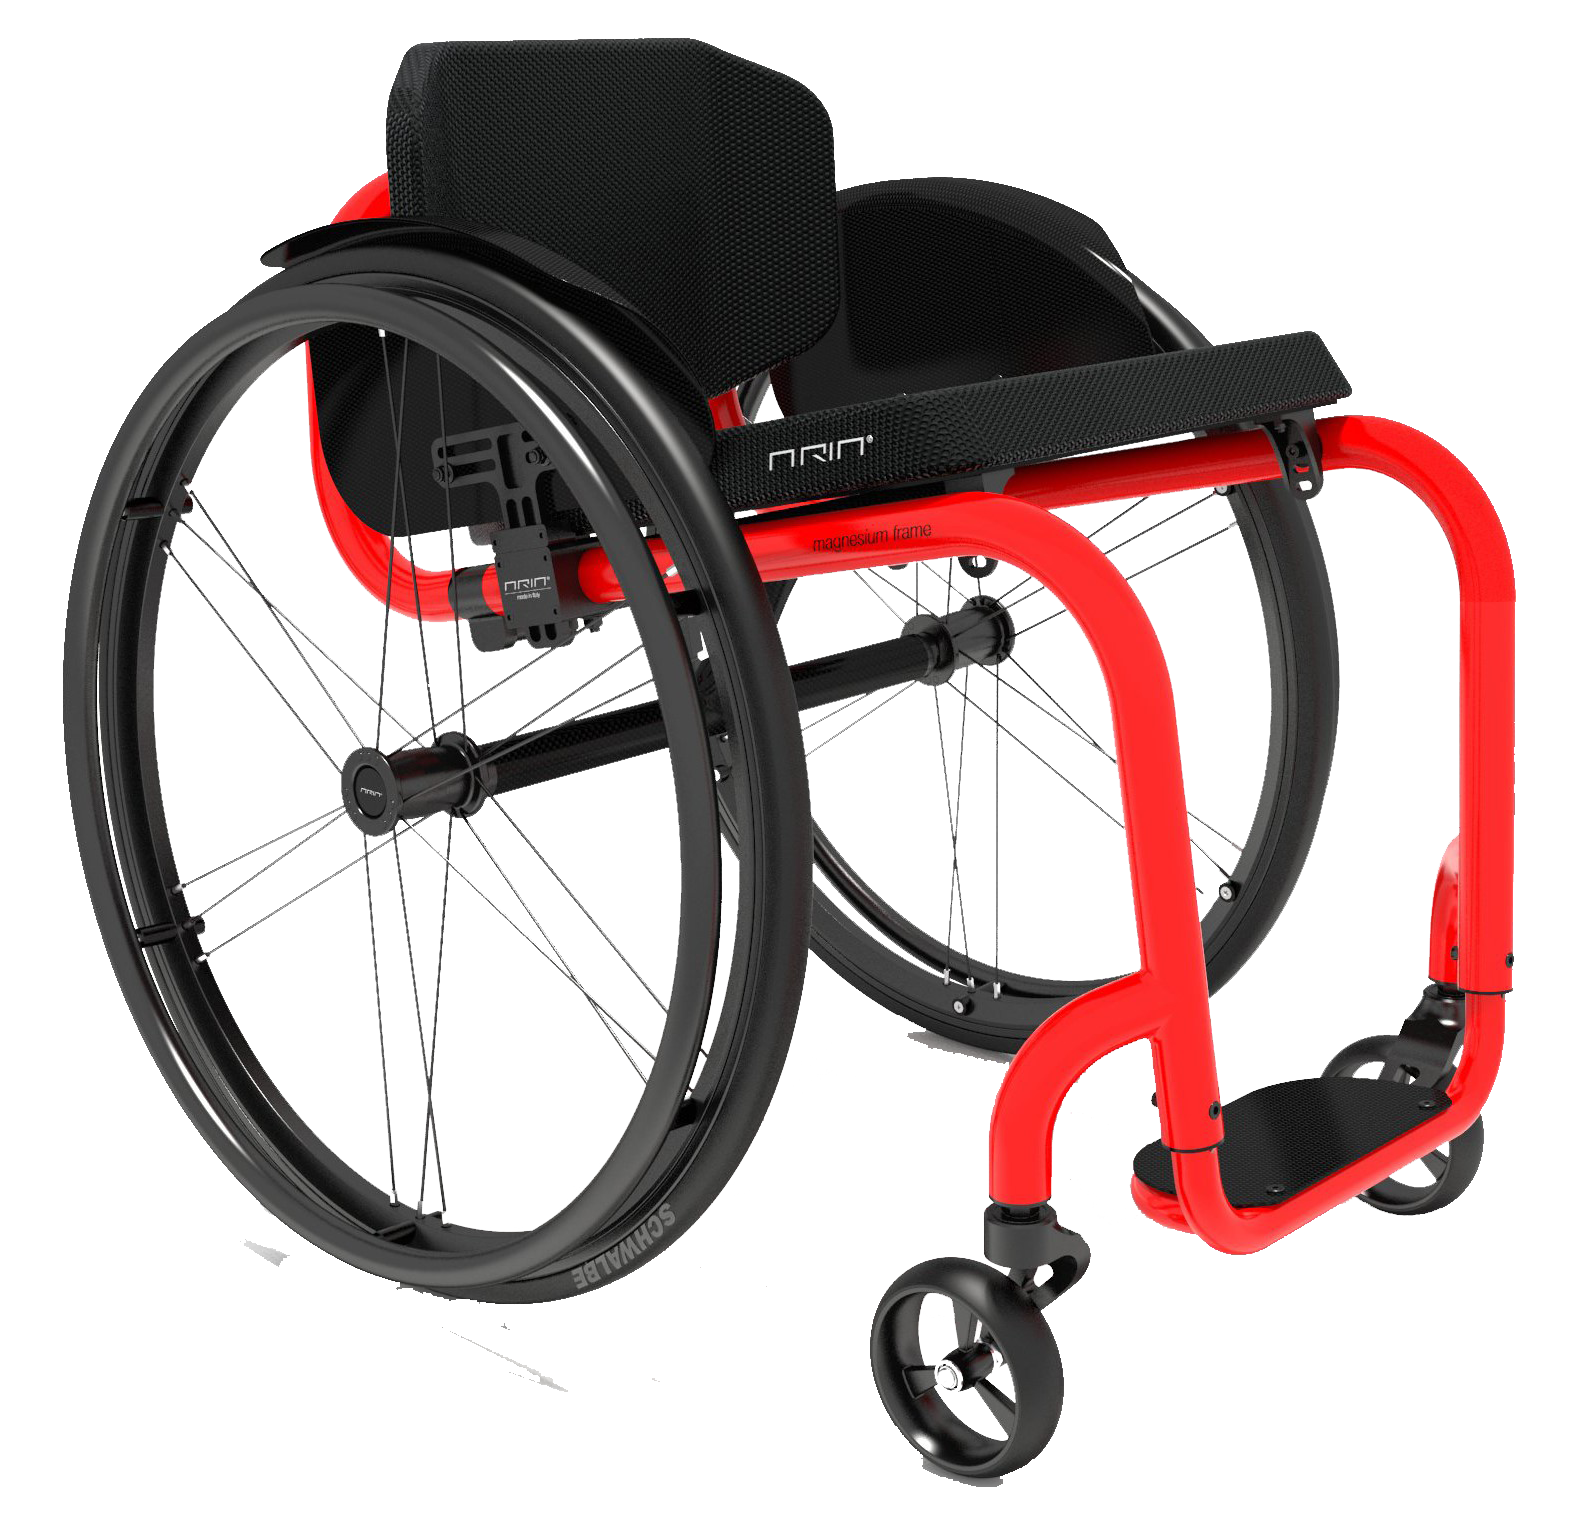 The Aria 1.0 is a 100% manually assembled product. Its fold-able backrest and rigid magnesium alloy frame, make it ideal for active users